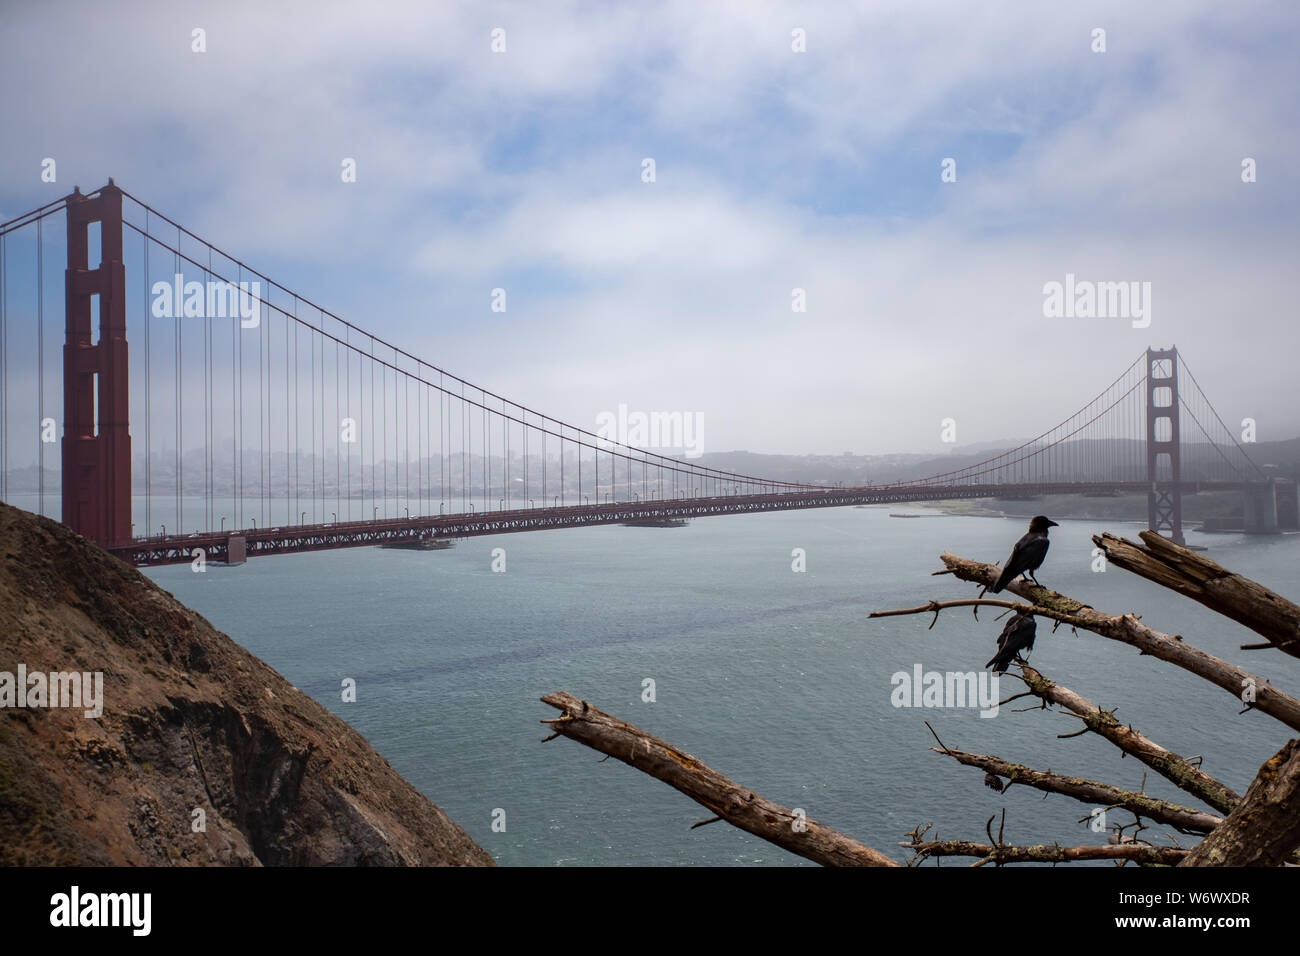 Crows perch on a tree on Marin Headlands with the Golden Gate Bridge in the background. Stock Photo